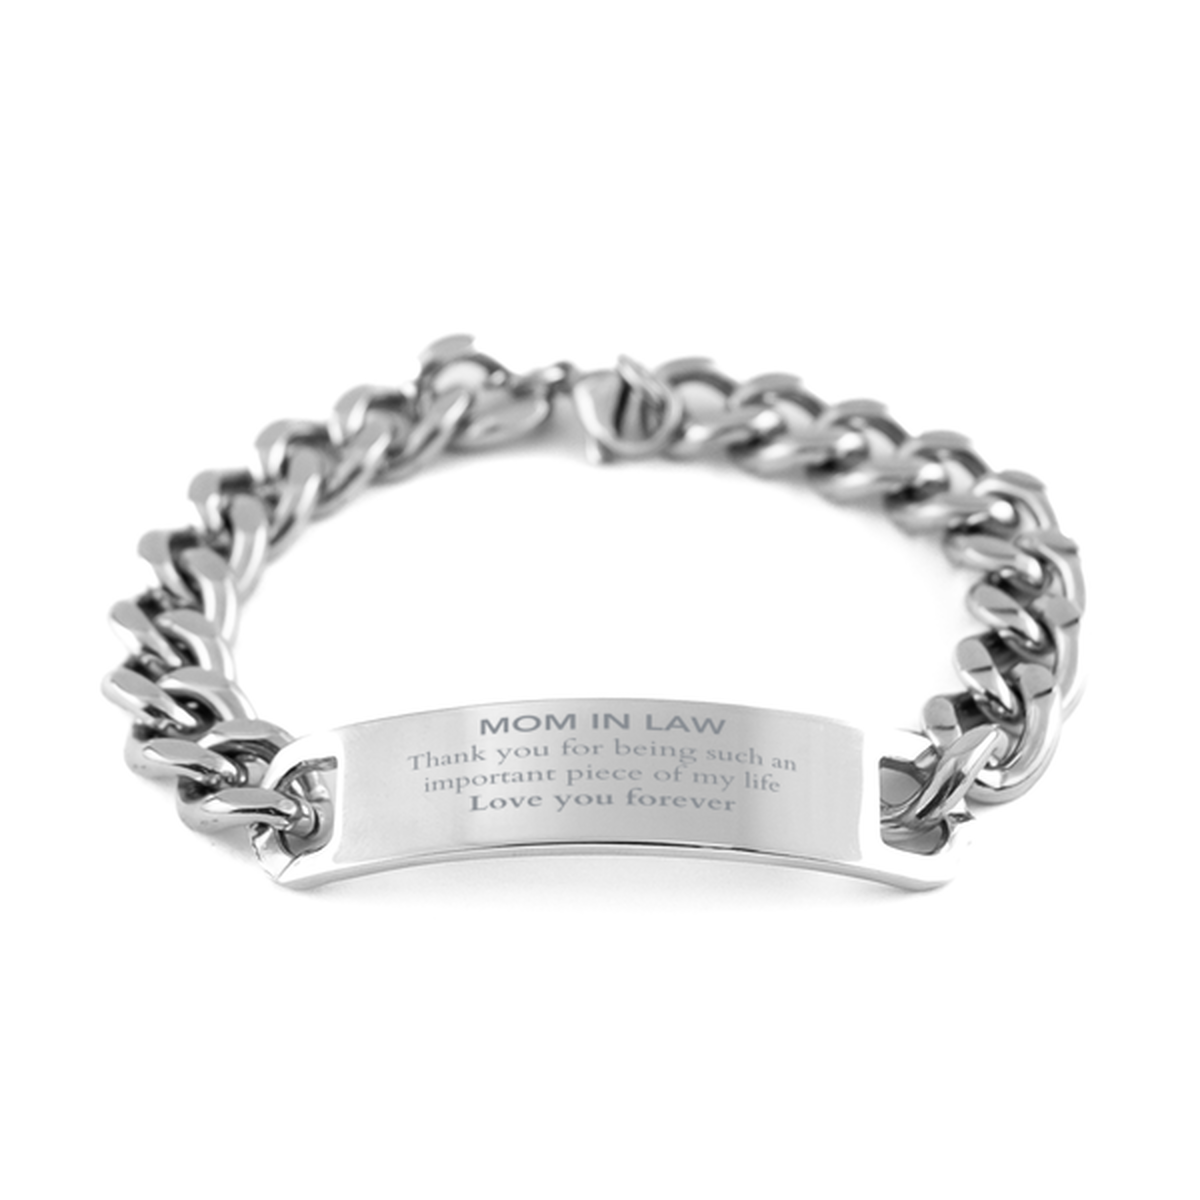 Appropriate Mom In Law Cuban Chain Stainless Steel Bracelet Epic Birthday Gifts for Mom In Law Thank you for being such an important piece of my life Mom In Law Christmas Mothers Fathers Day